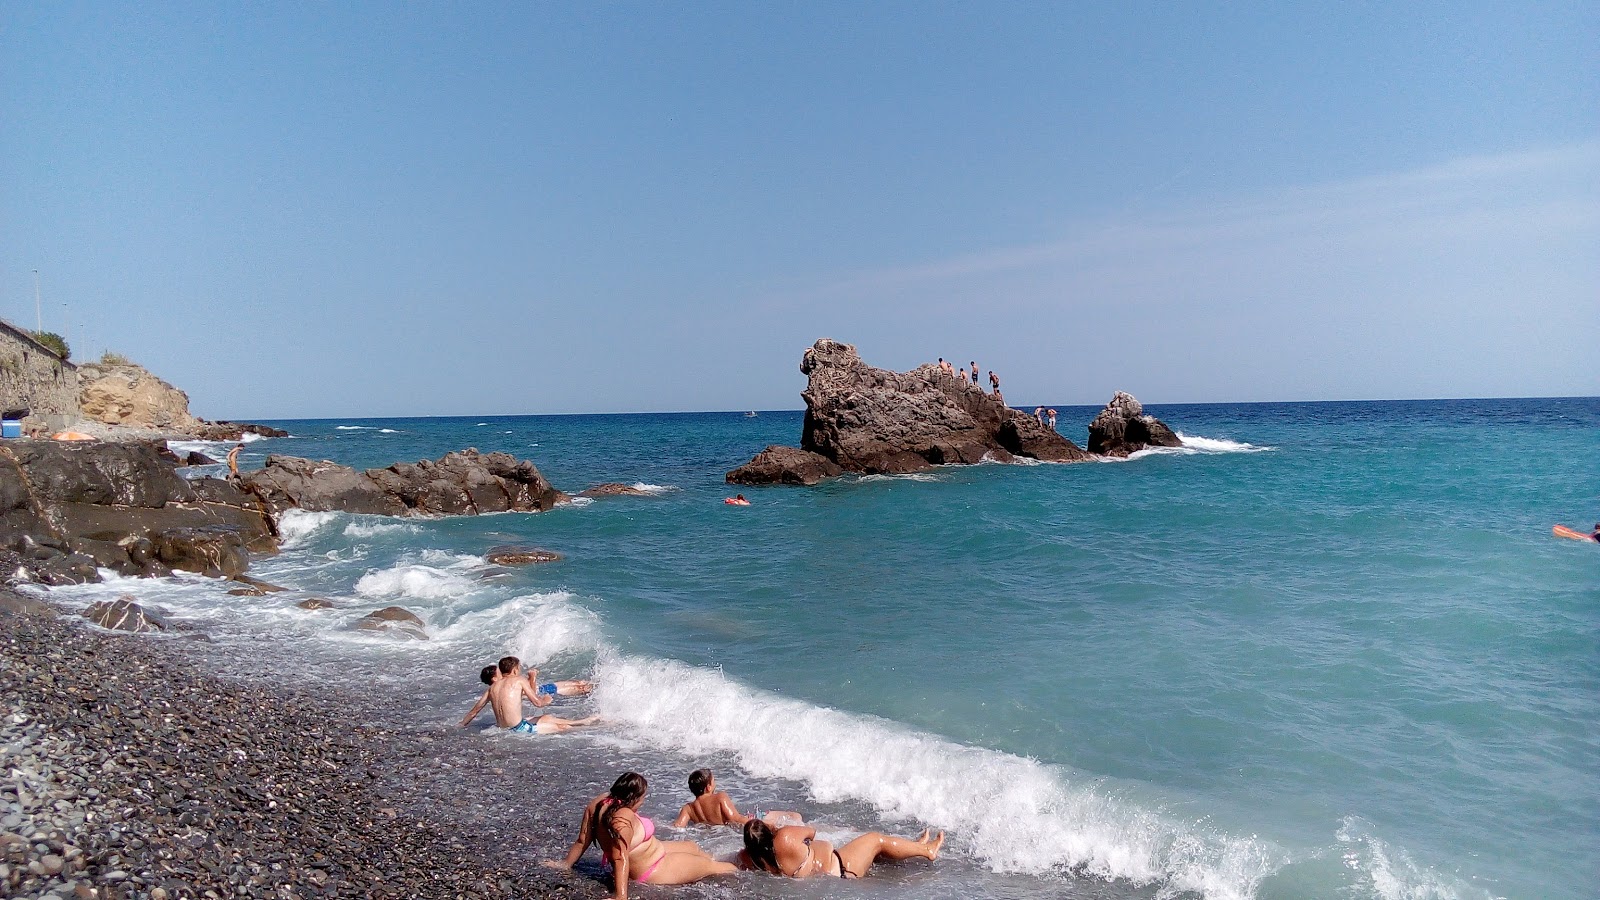 Photo of Spiaggia Galeazza surrounded by mountains